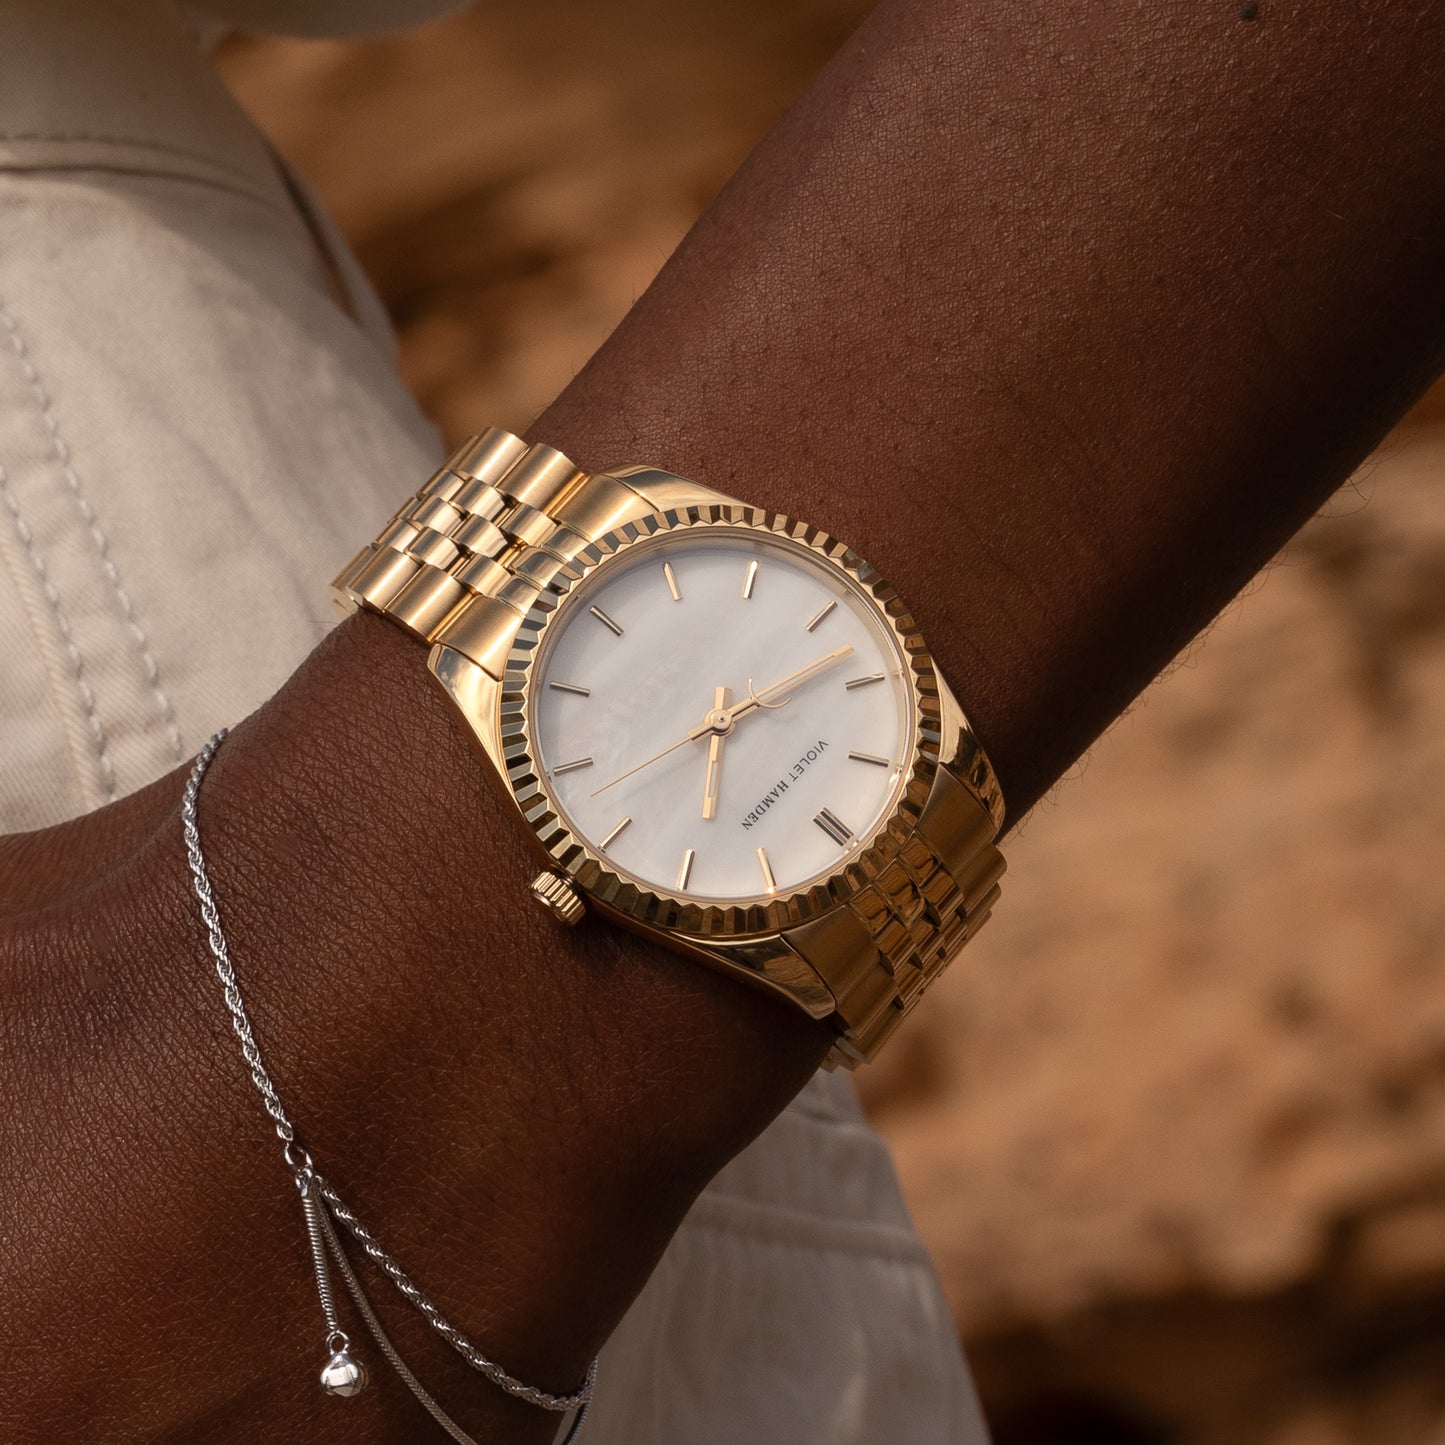 Sunrise round ladies watch gold coloured and mother of pearl